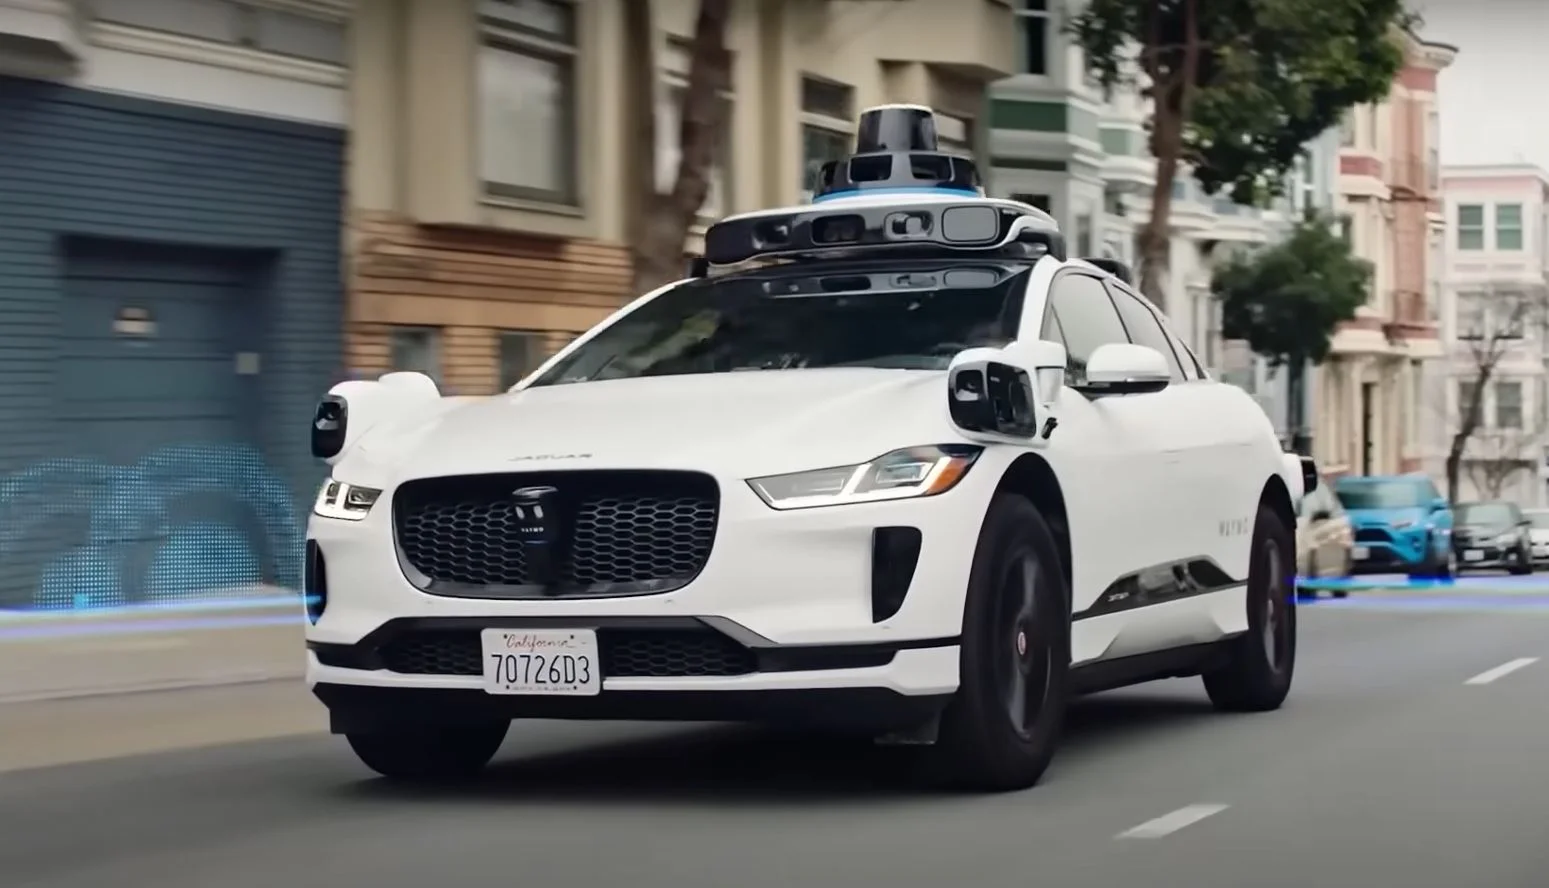 Autonomous Driving – The Future of Self-Driving Cars